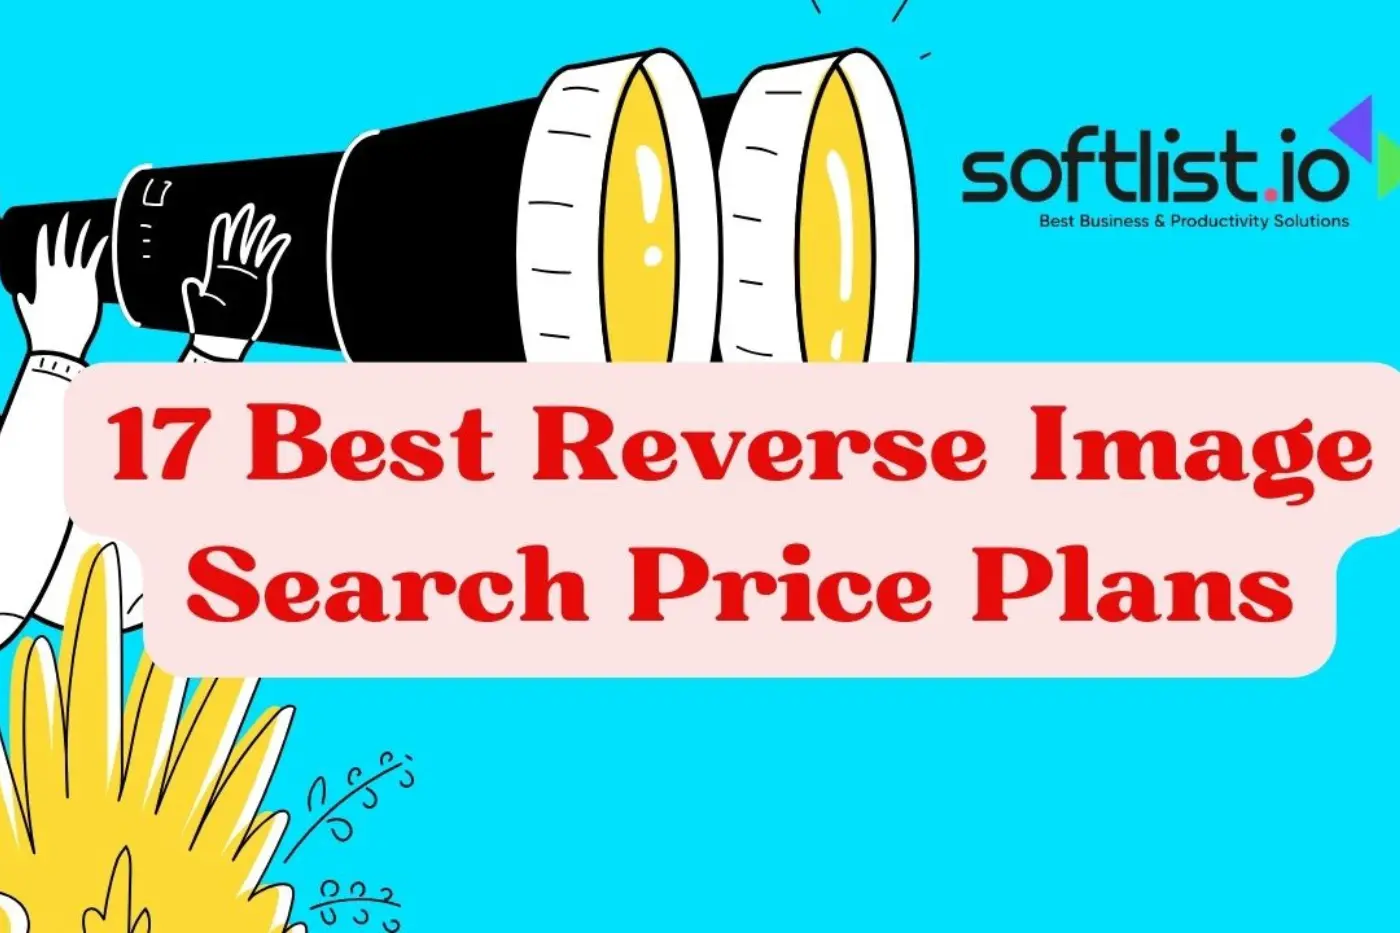 17 Best Reverse Image Search Price Plans